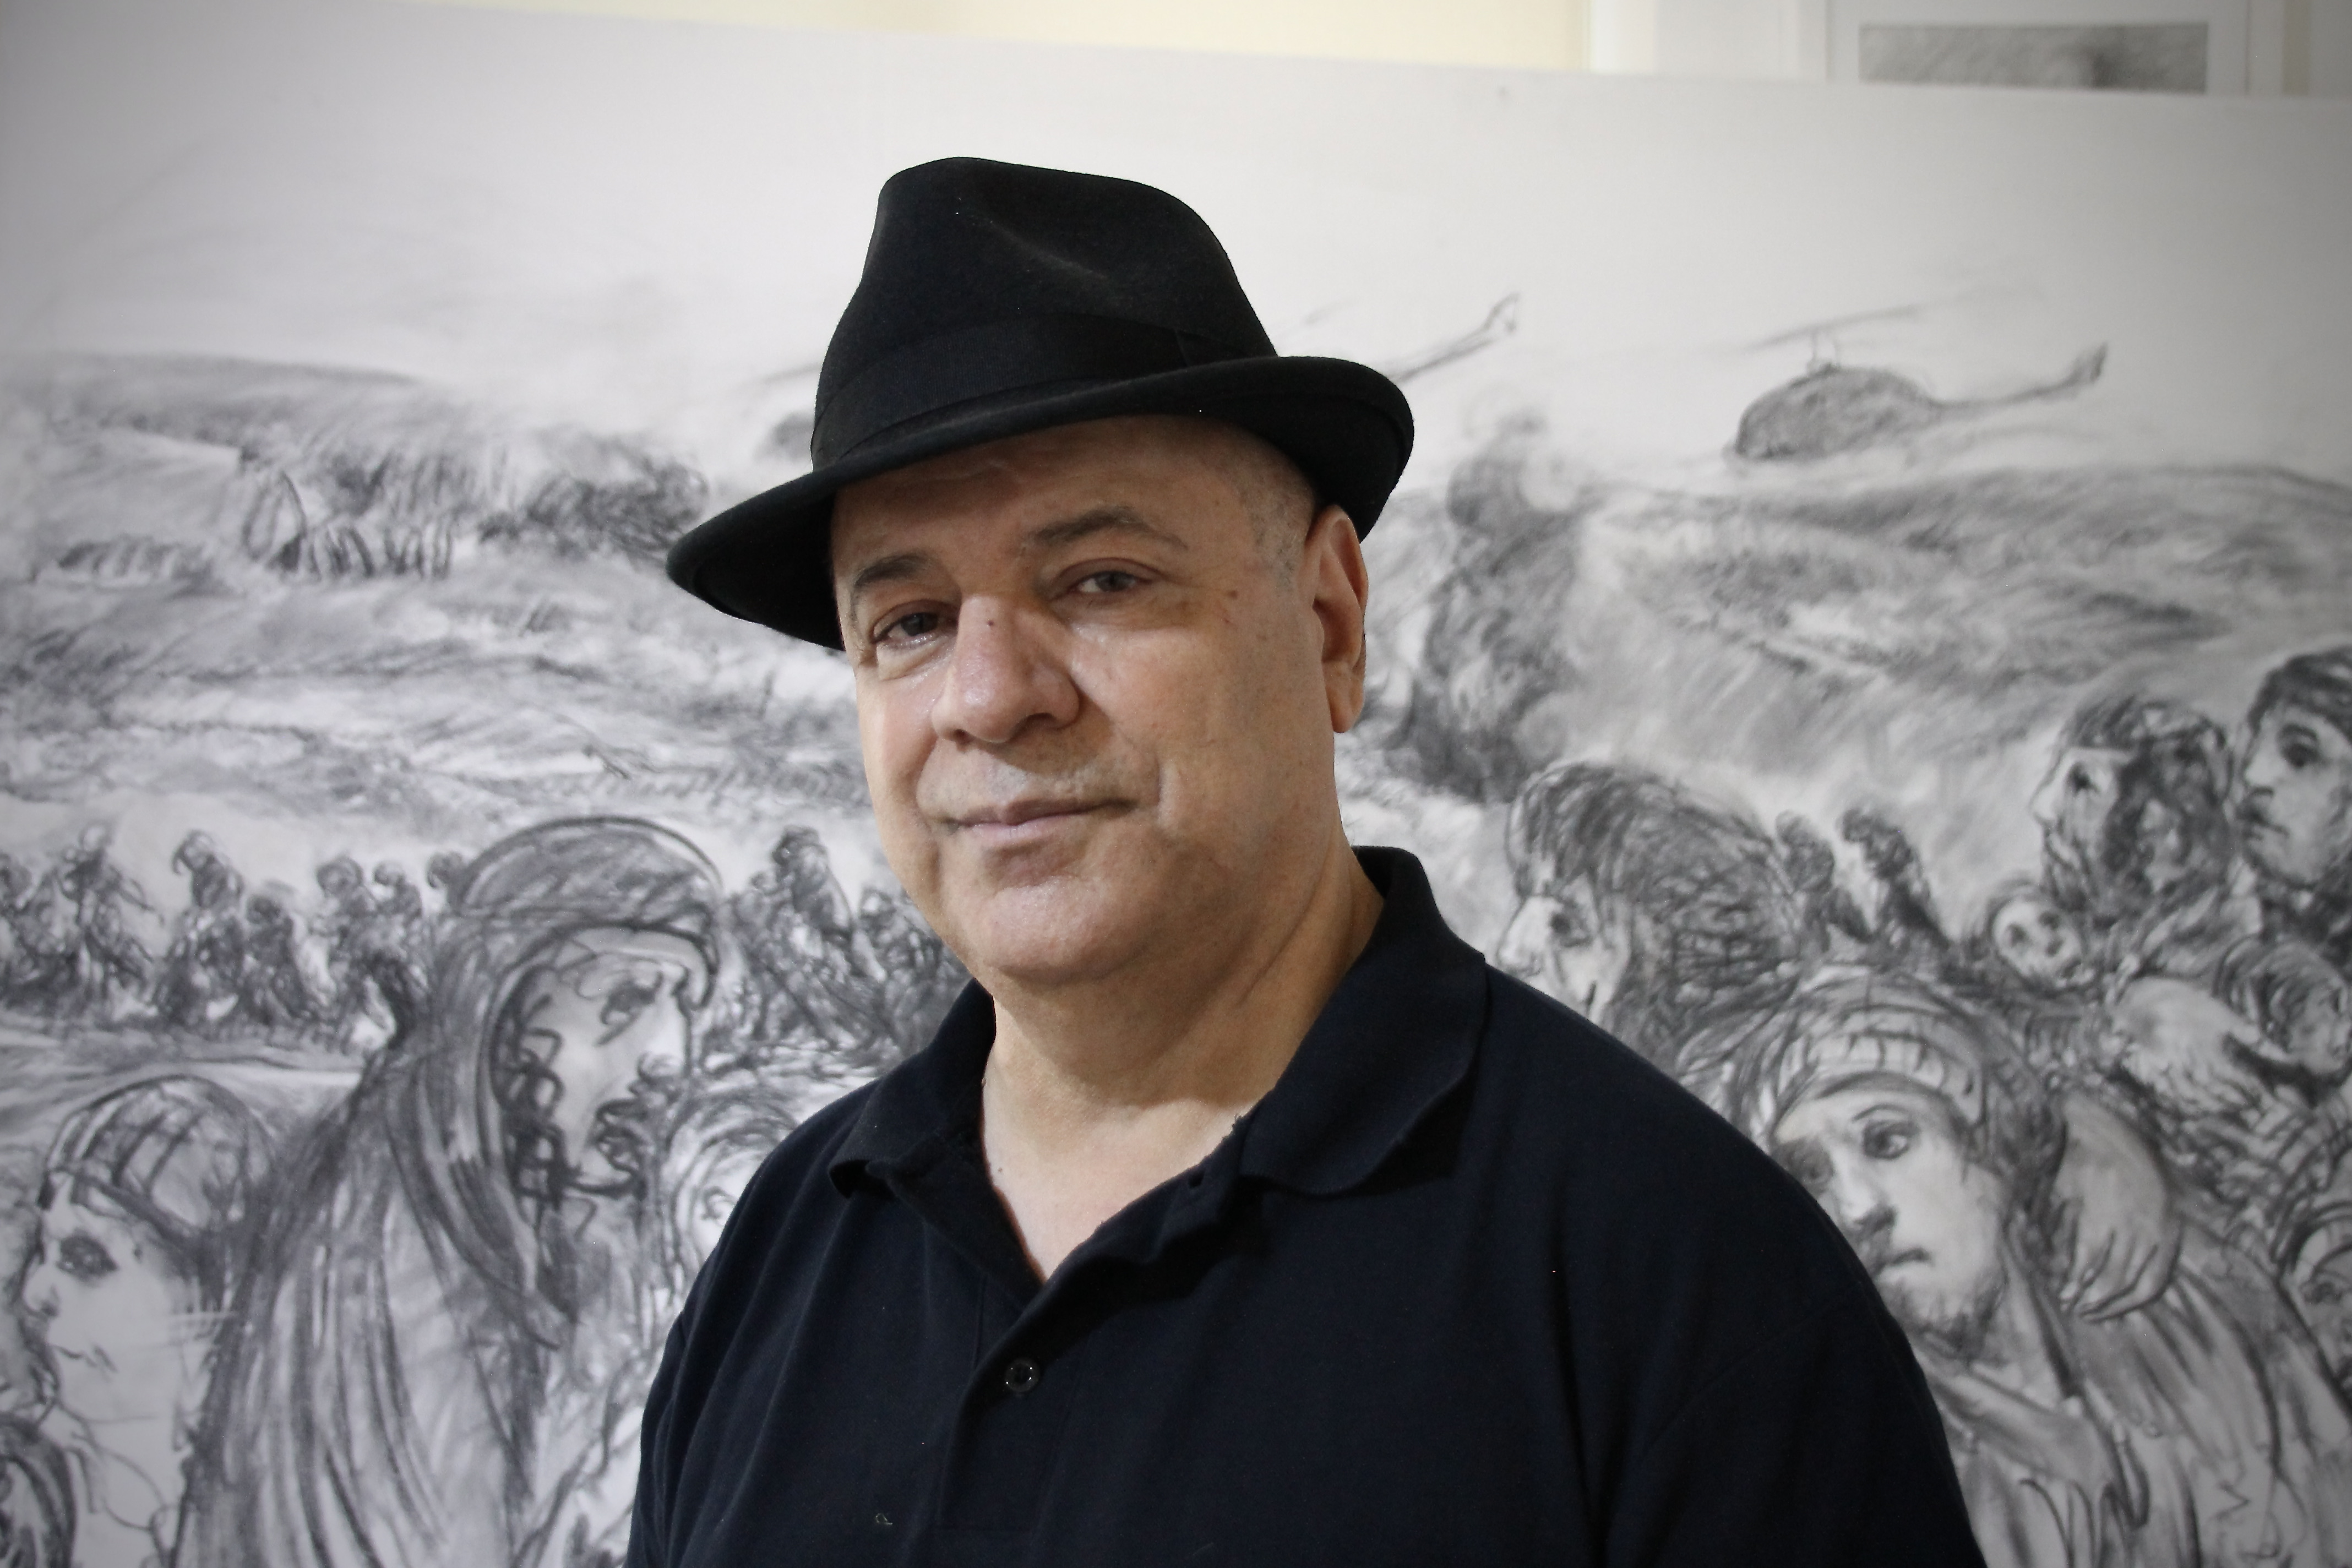 Kurdish artist Osman Ahmed in front of one of his drawings.